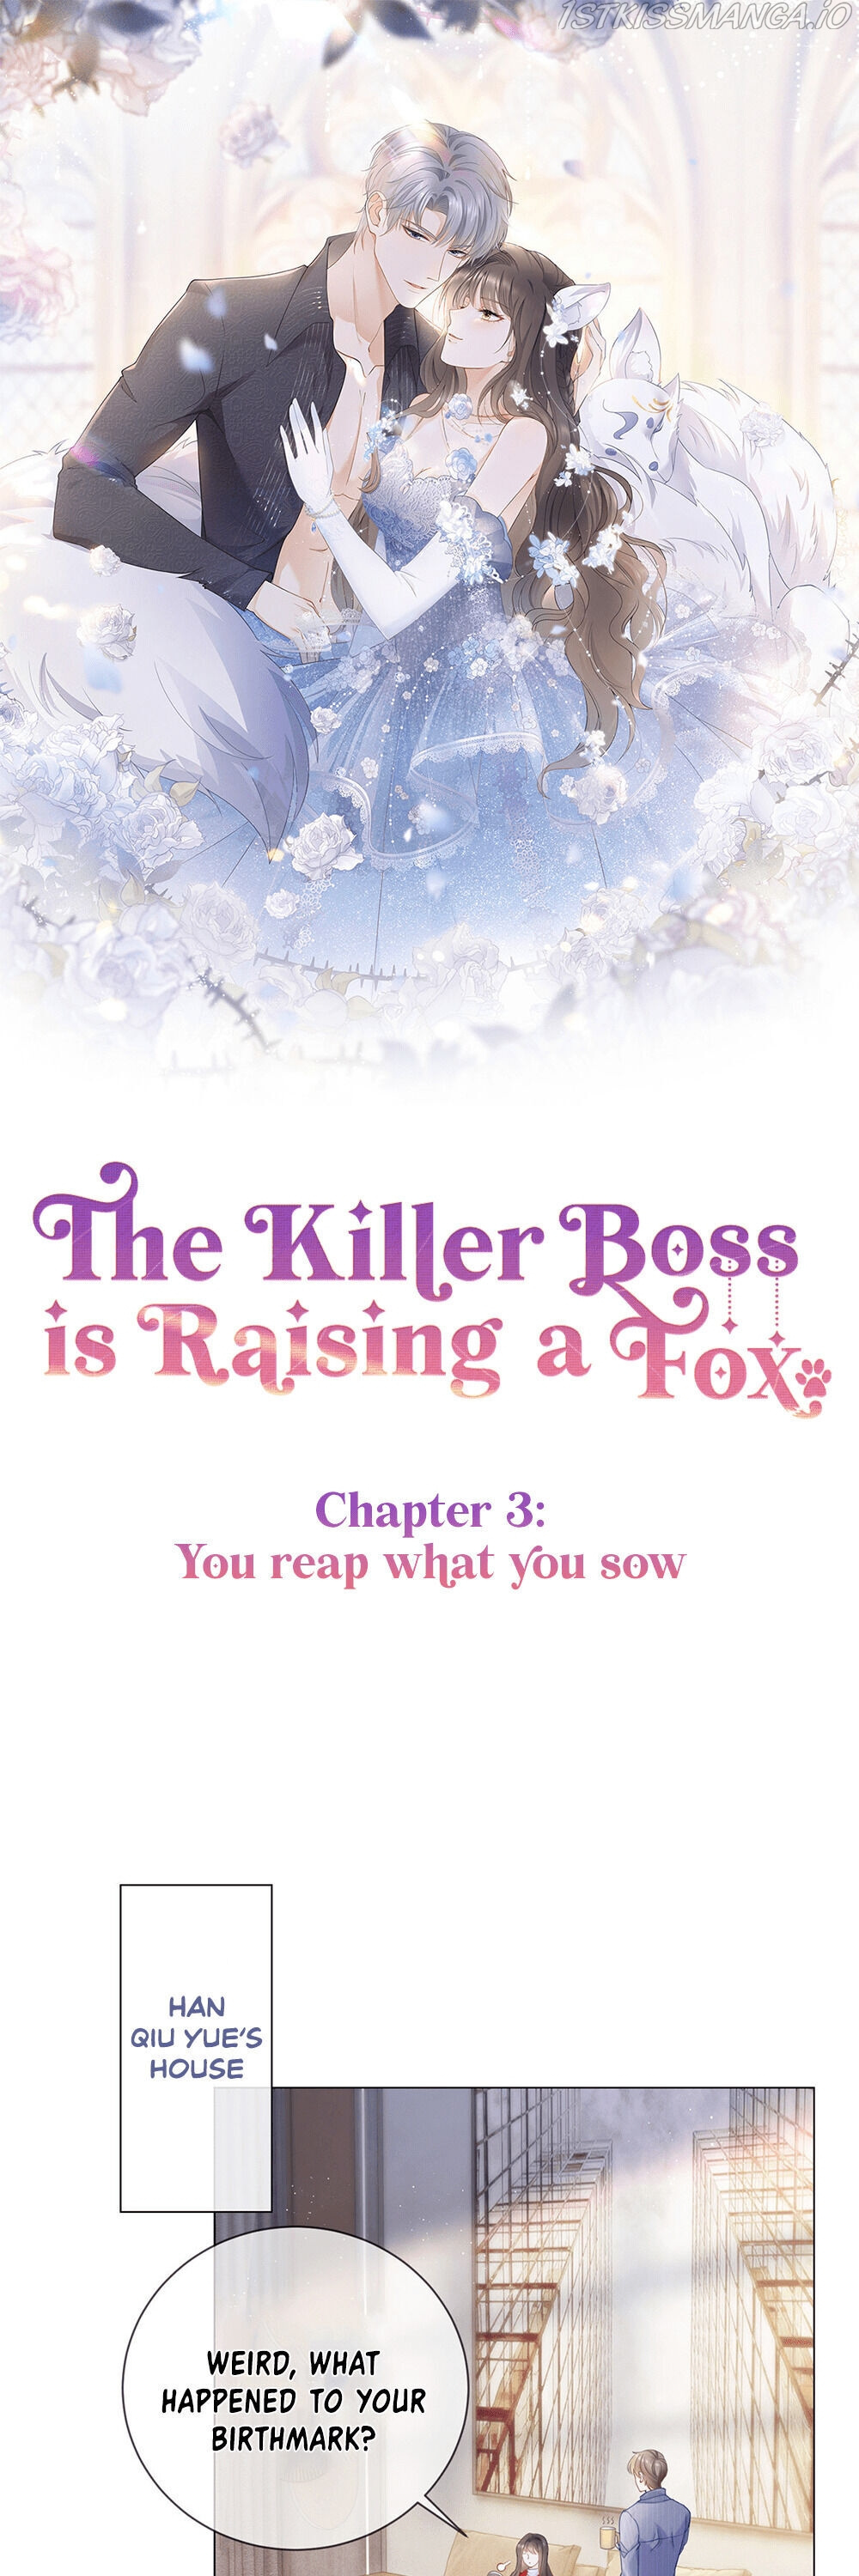 The Killer Boss Is Raising A Fox - Page 1